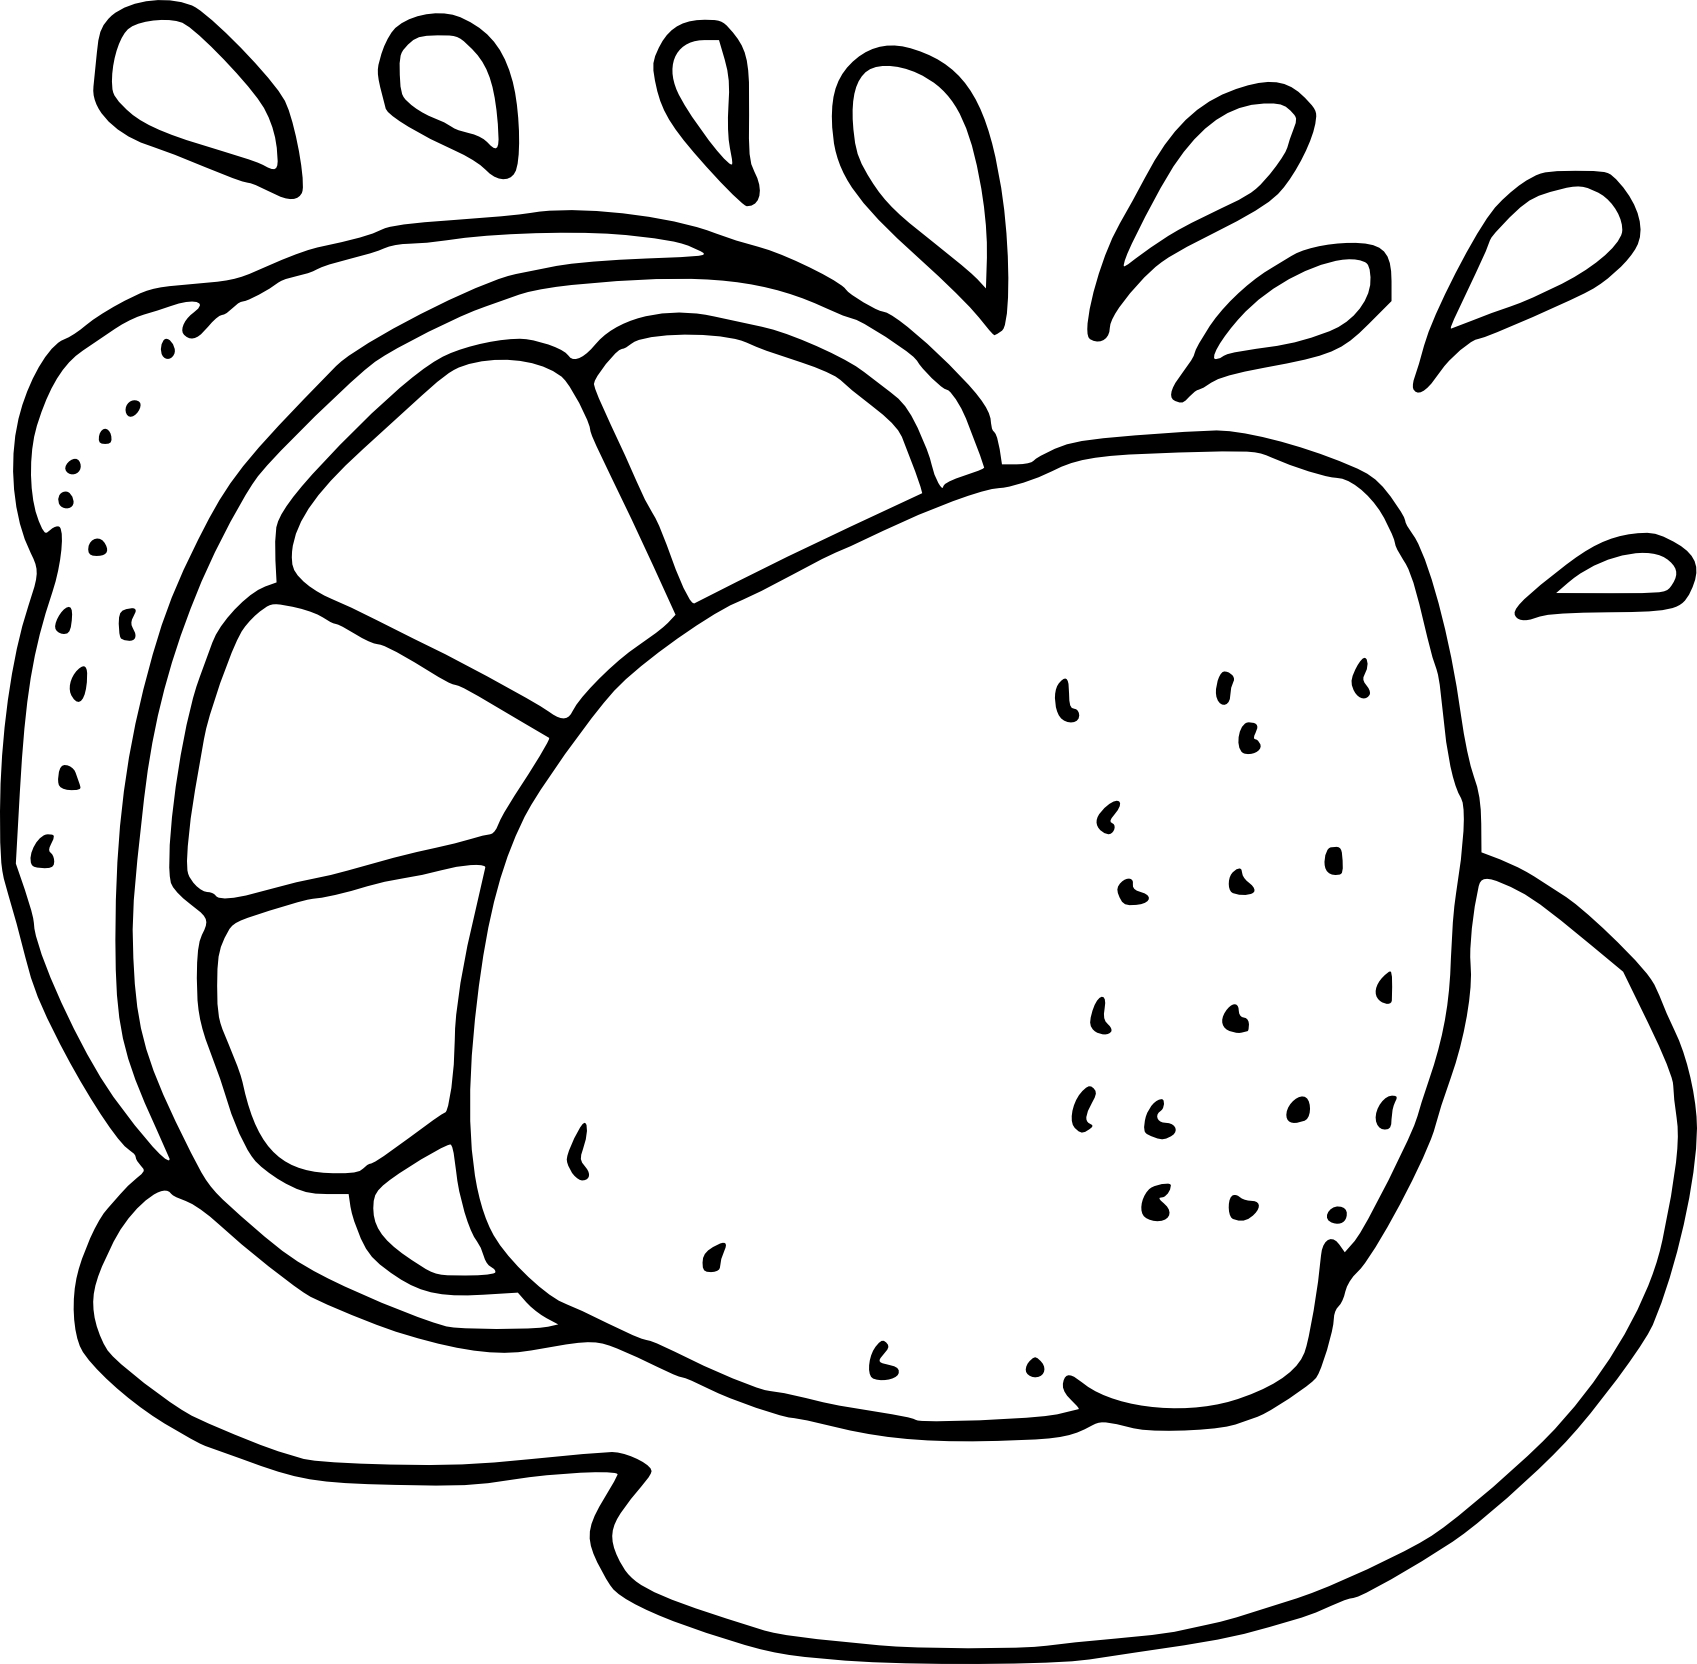 Lemon And Design coloring page